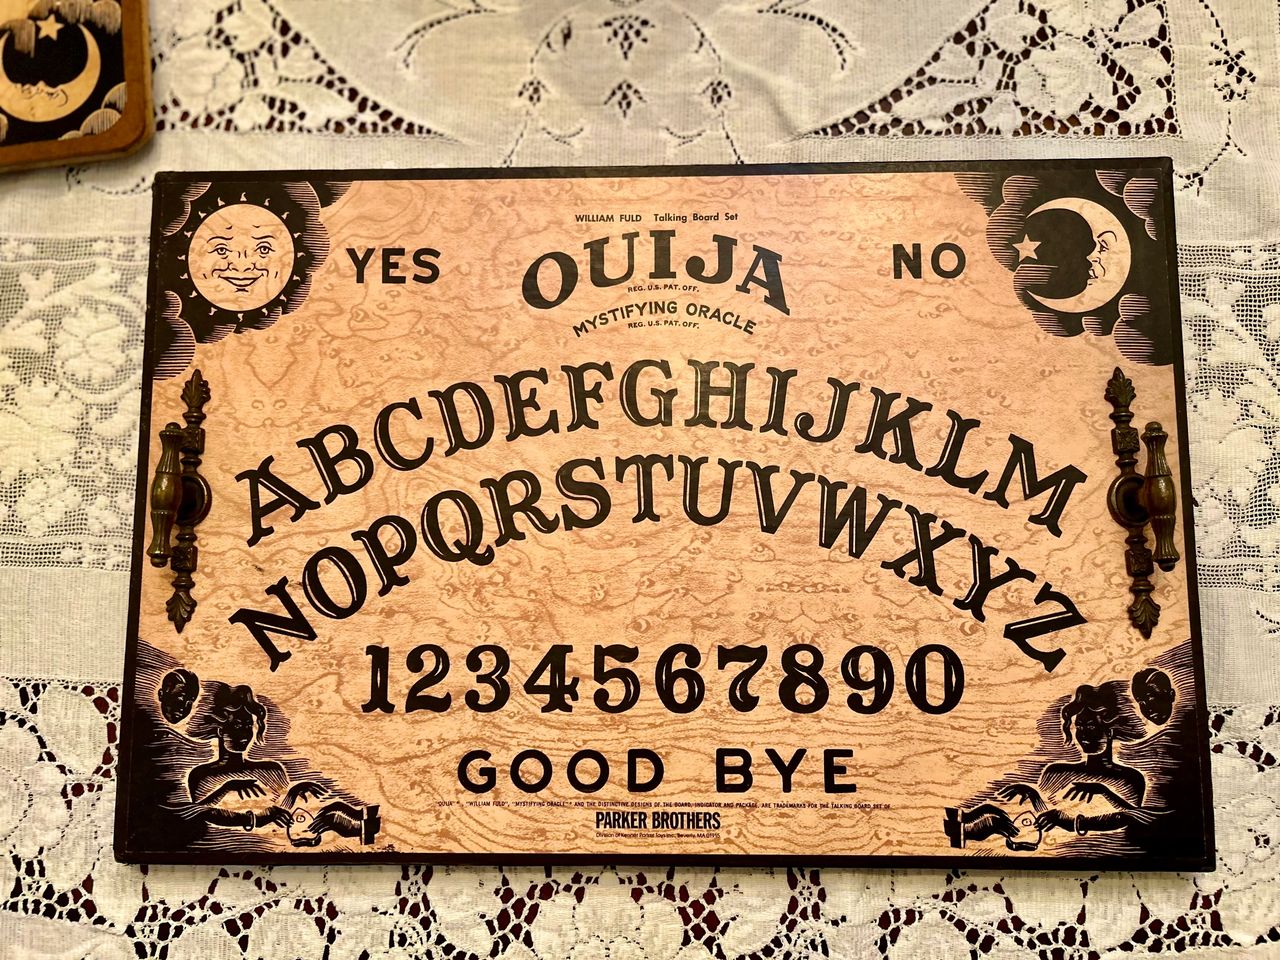 I use vintage Ouija boards picked up at yard sales throughout the year.